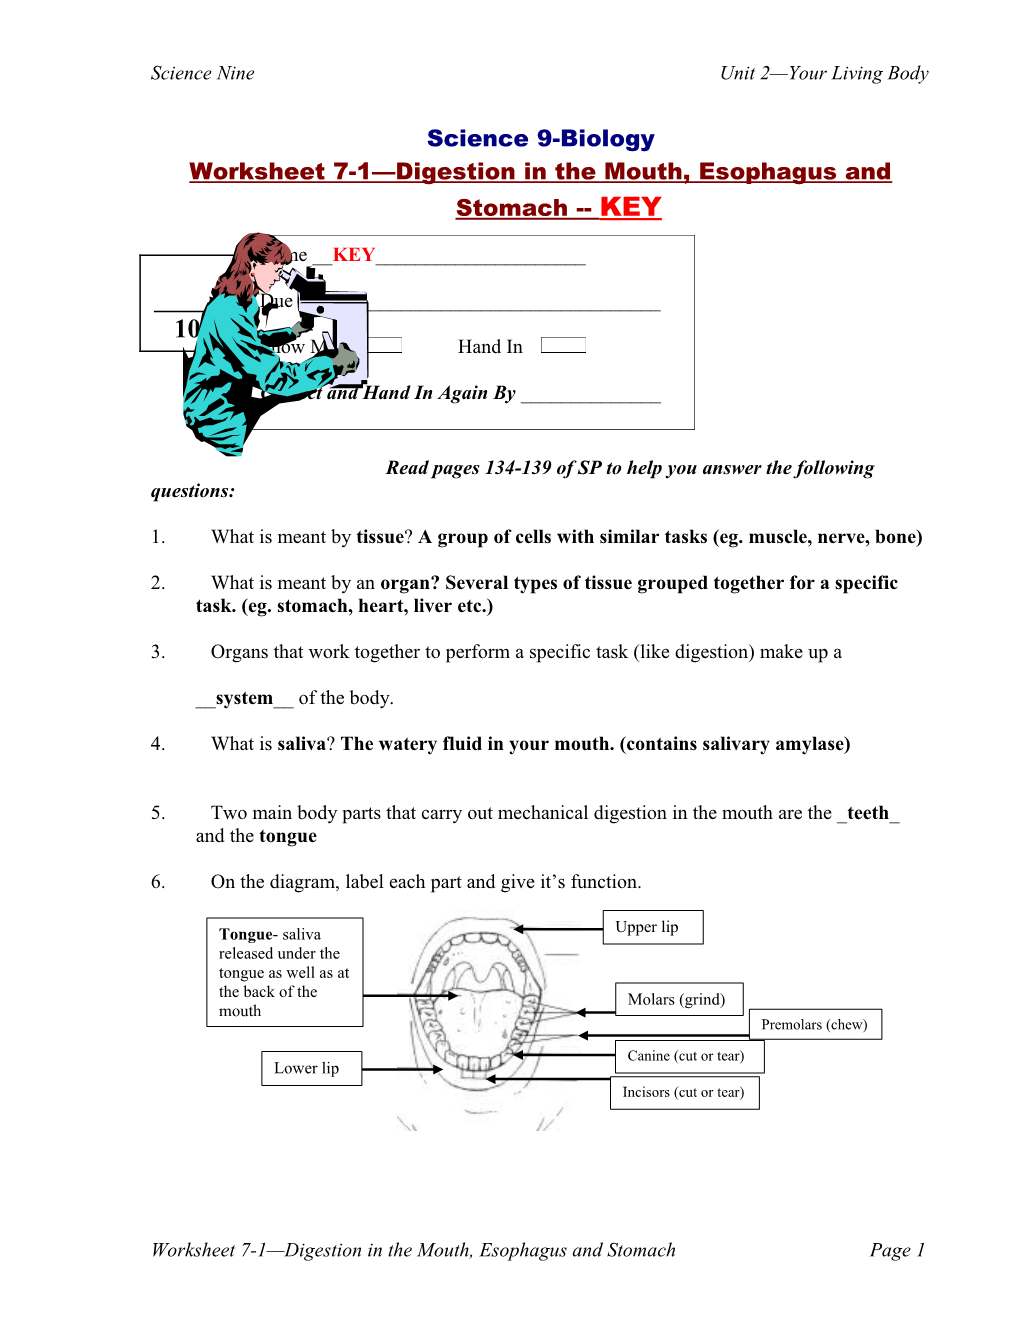 Worksheet 7-1 Digestion in the Mouth, Esophagus and Stomach KEY